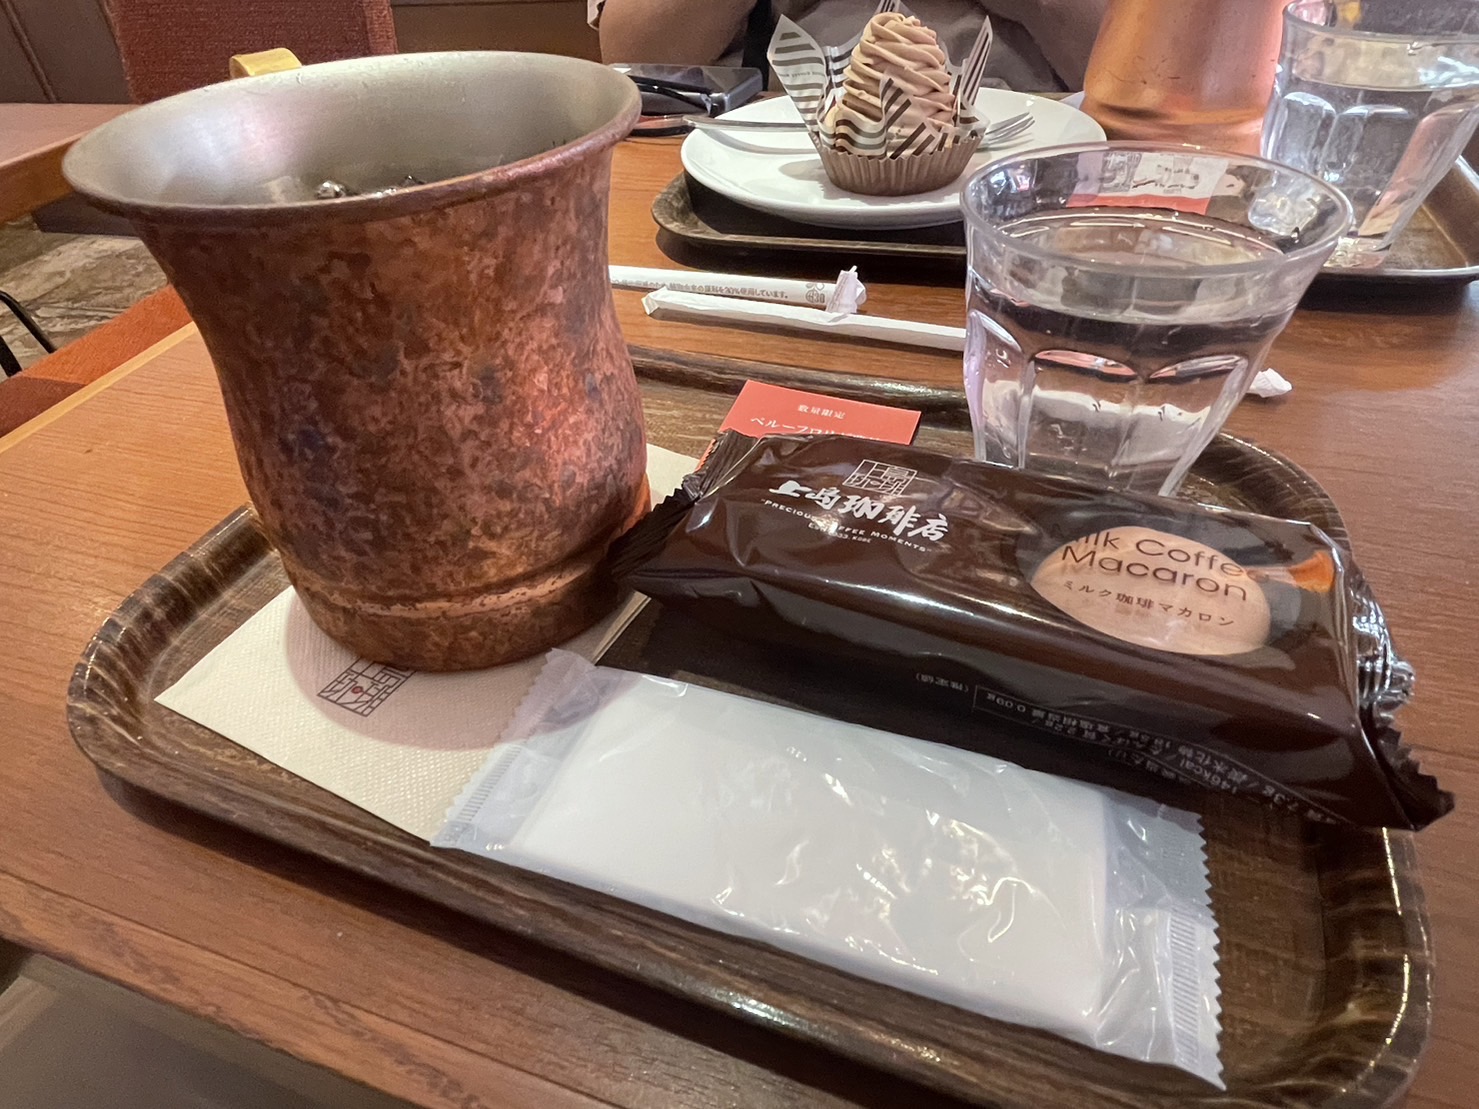 A photo from a Japanese cafe, by DigitallyDownloaded.net